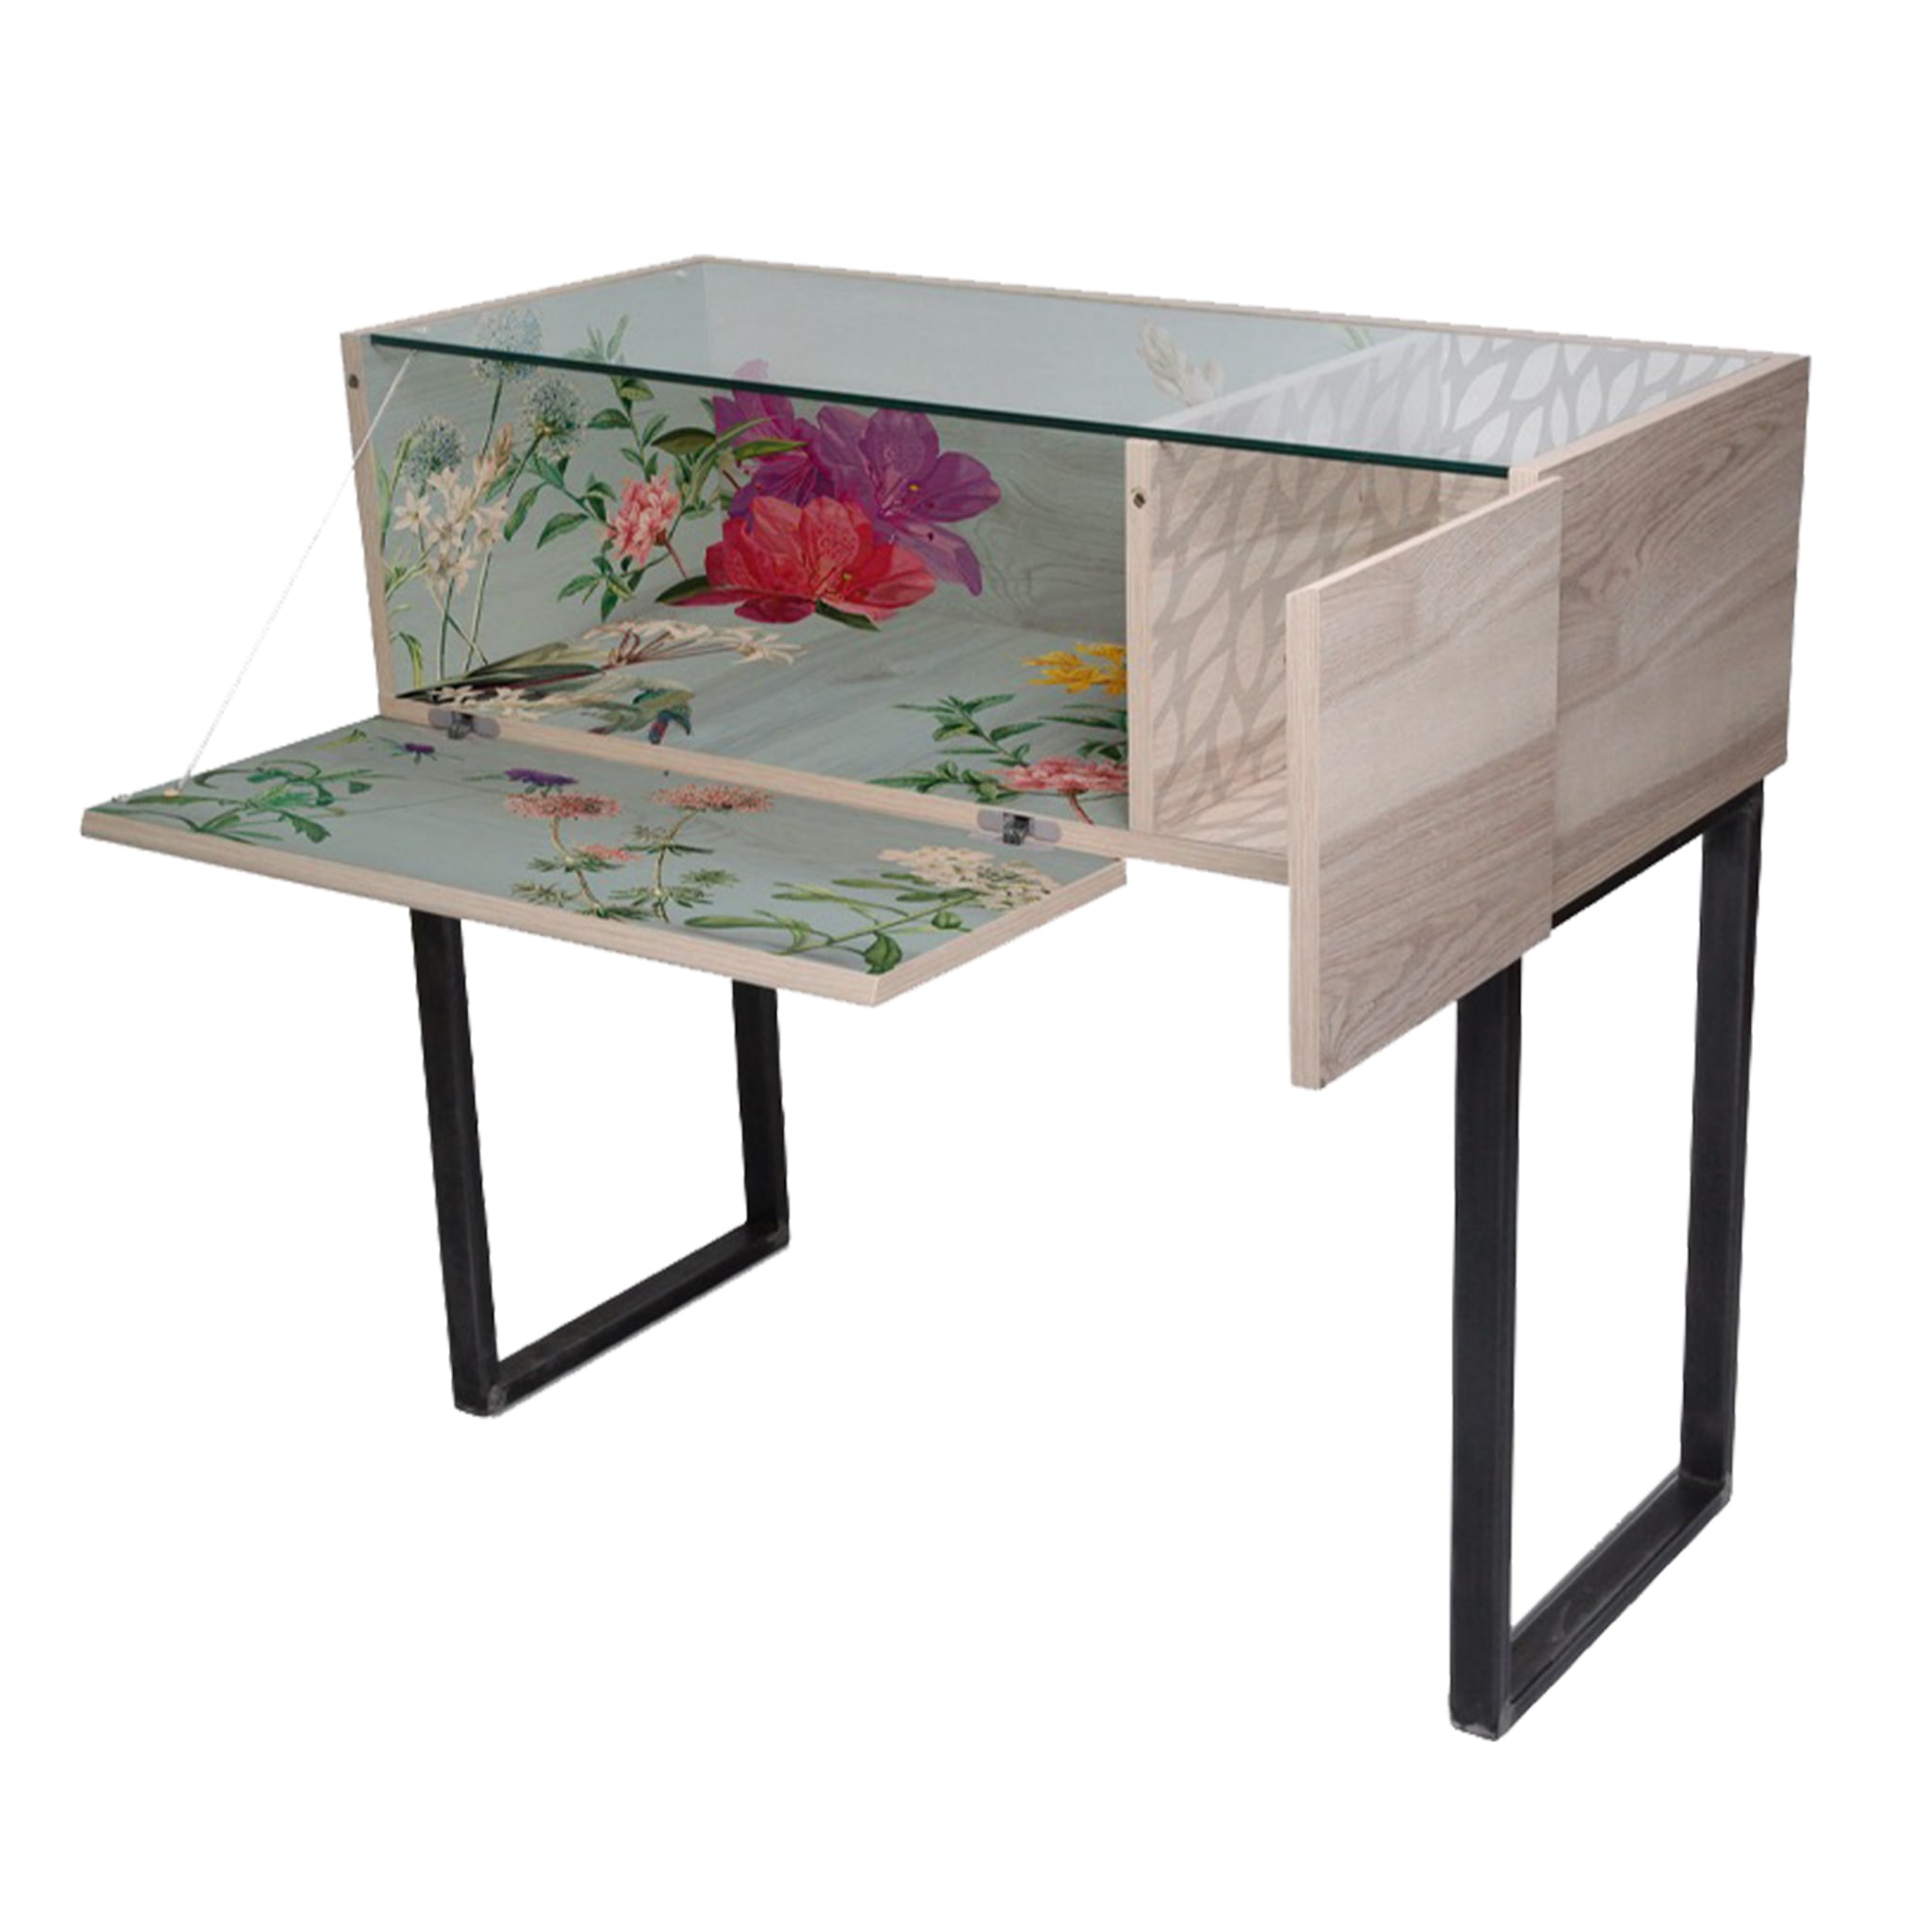 Duo Spring Console By Luciana Gomez - Alternative view 2